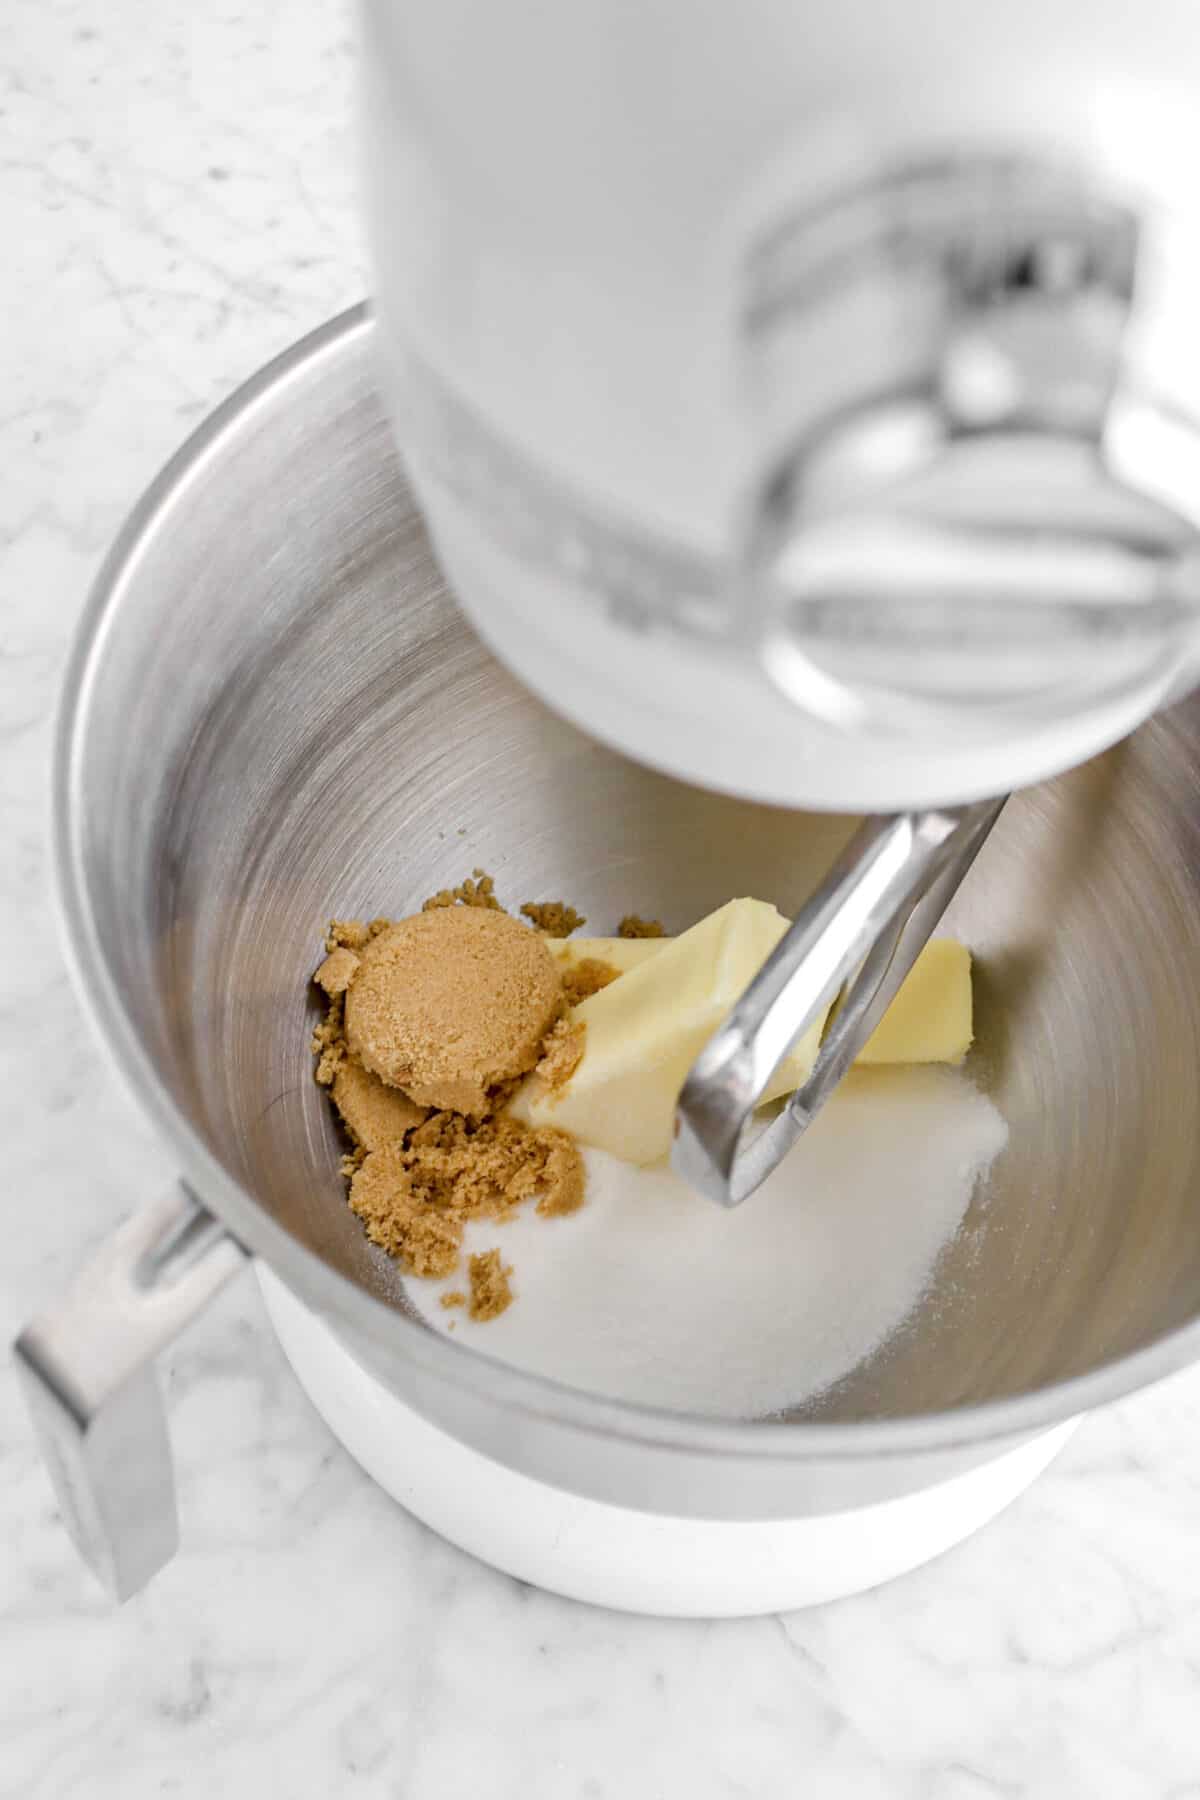 brown sugar, white sugar, and butter in a mixer